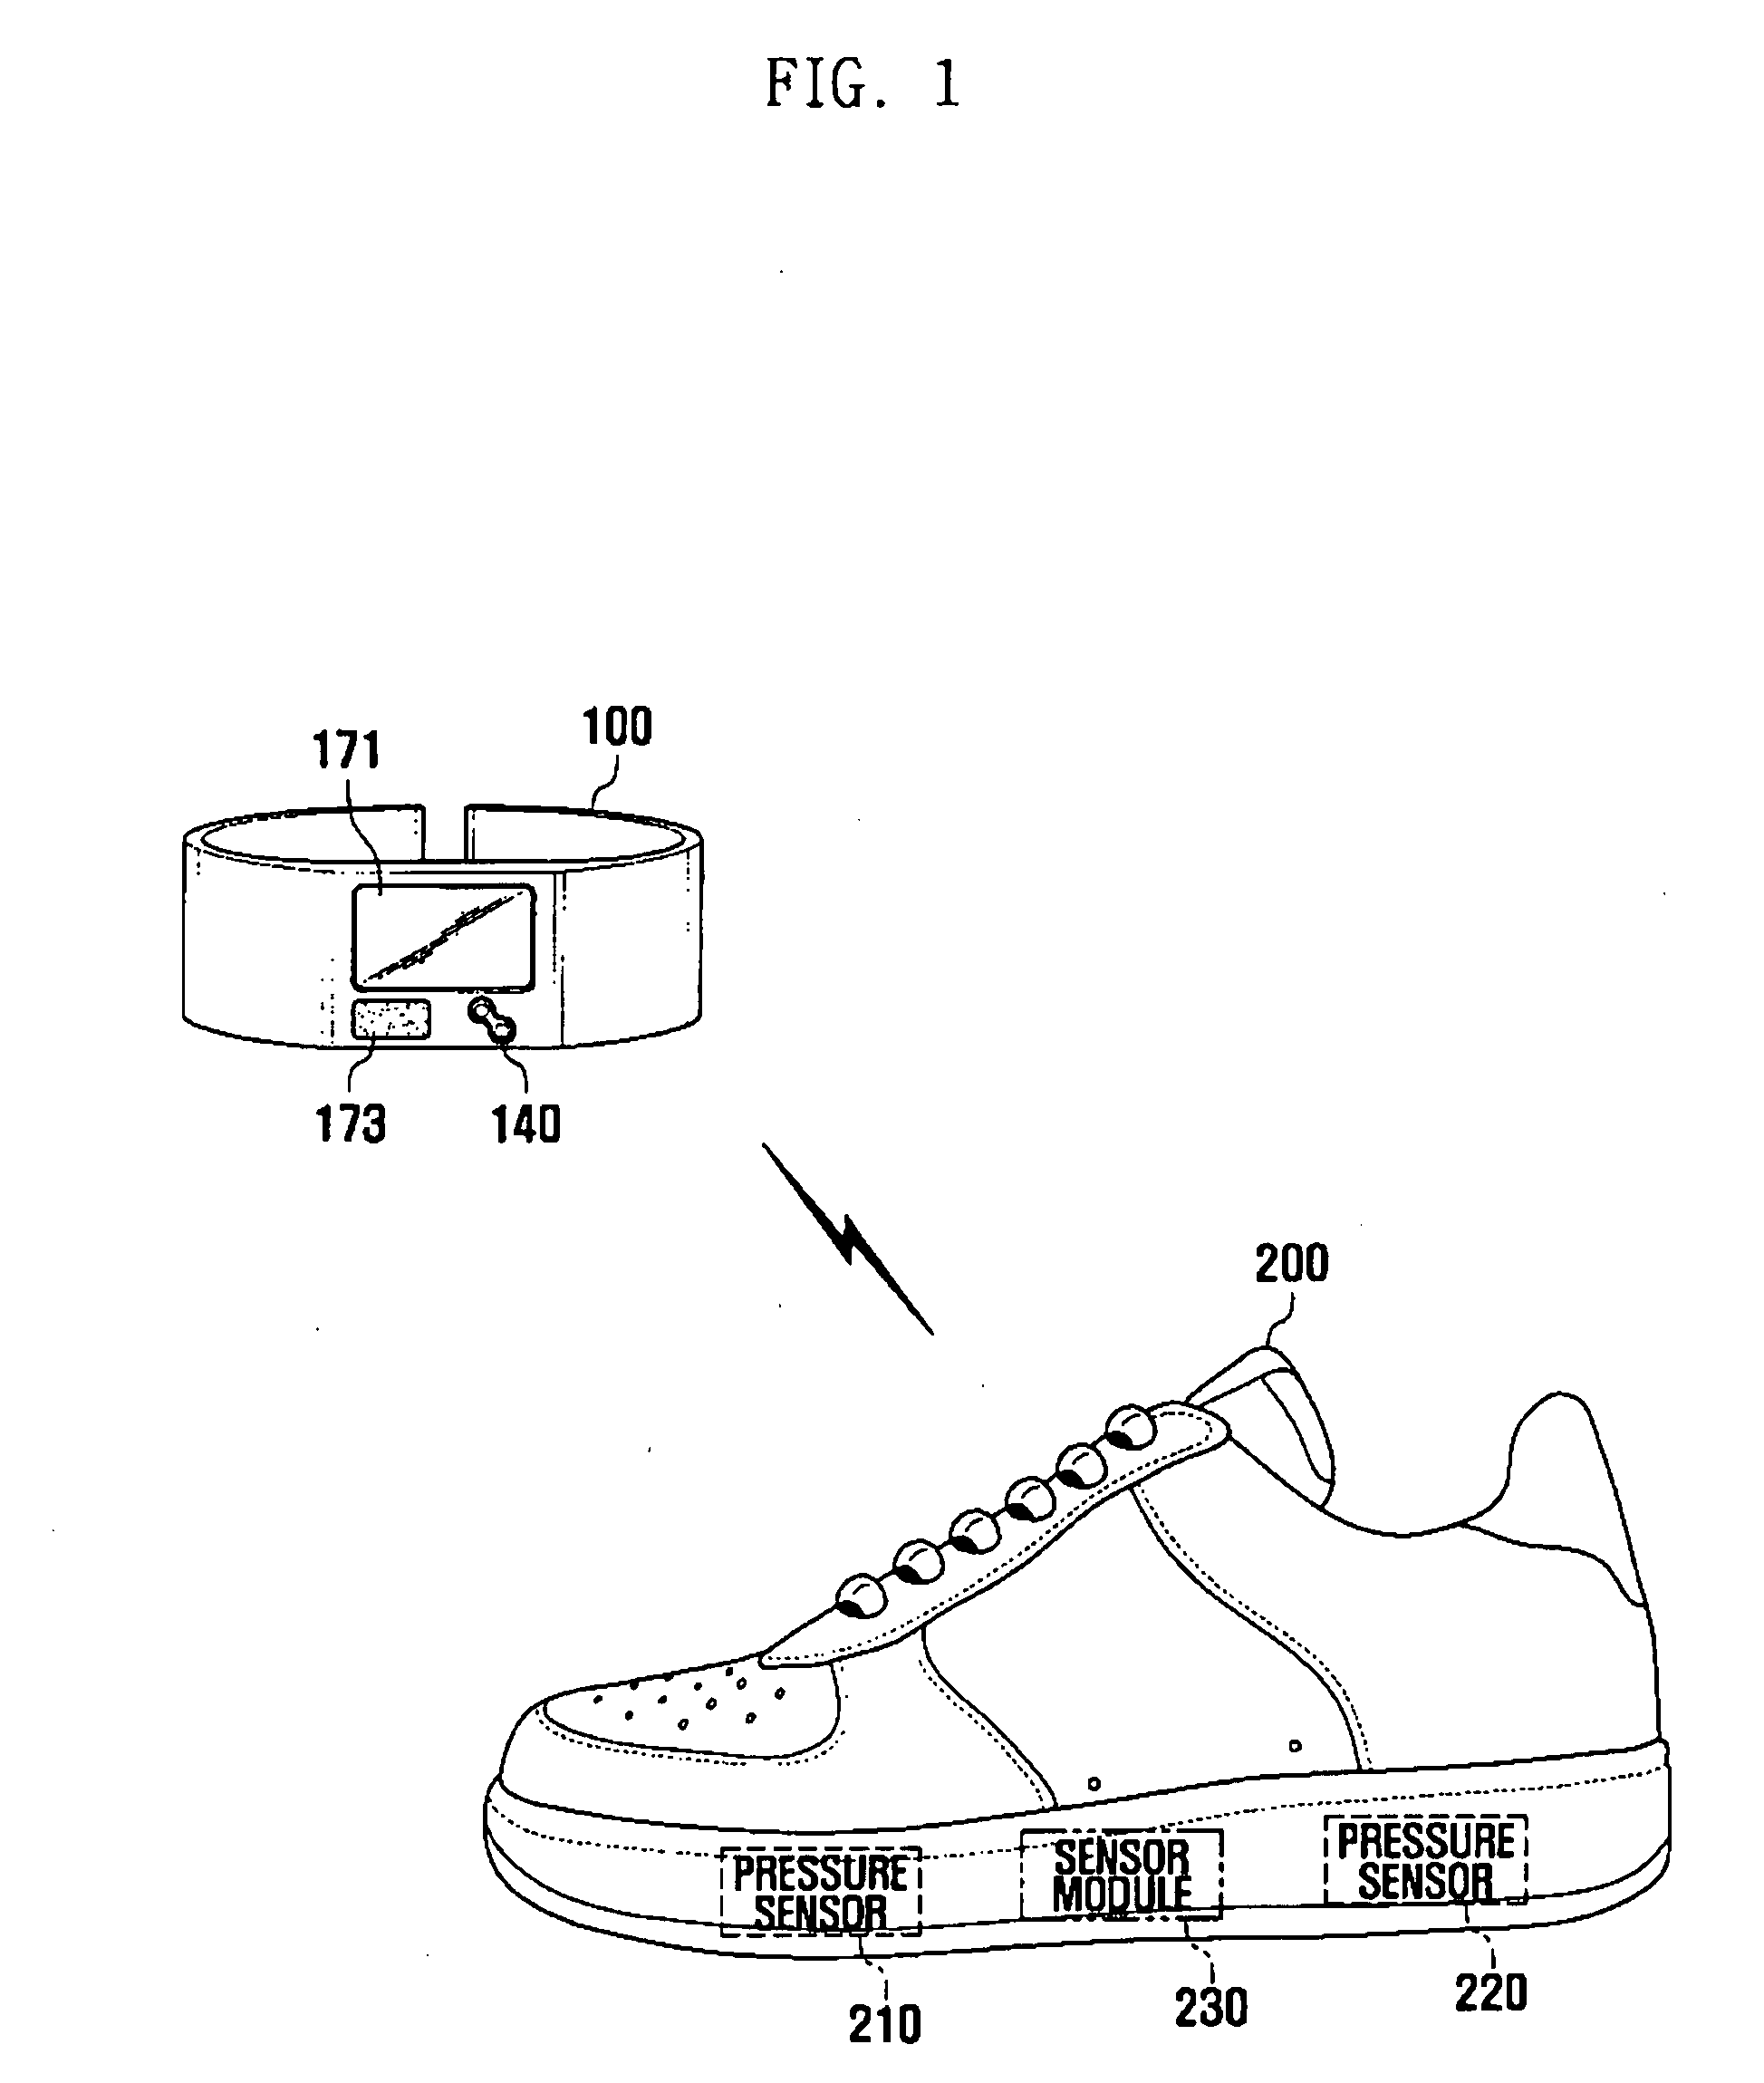 Exercise assistant system and method for managing exercise strength in conjunction with music